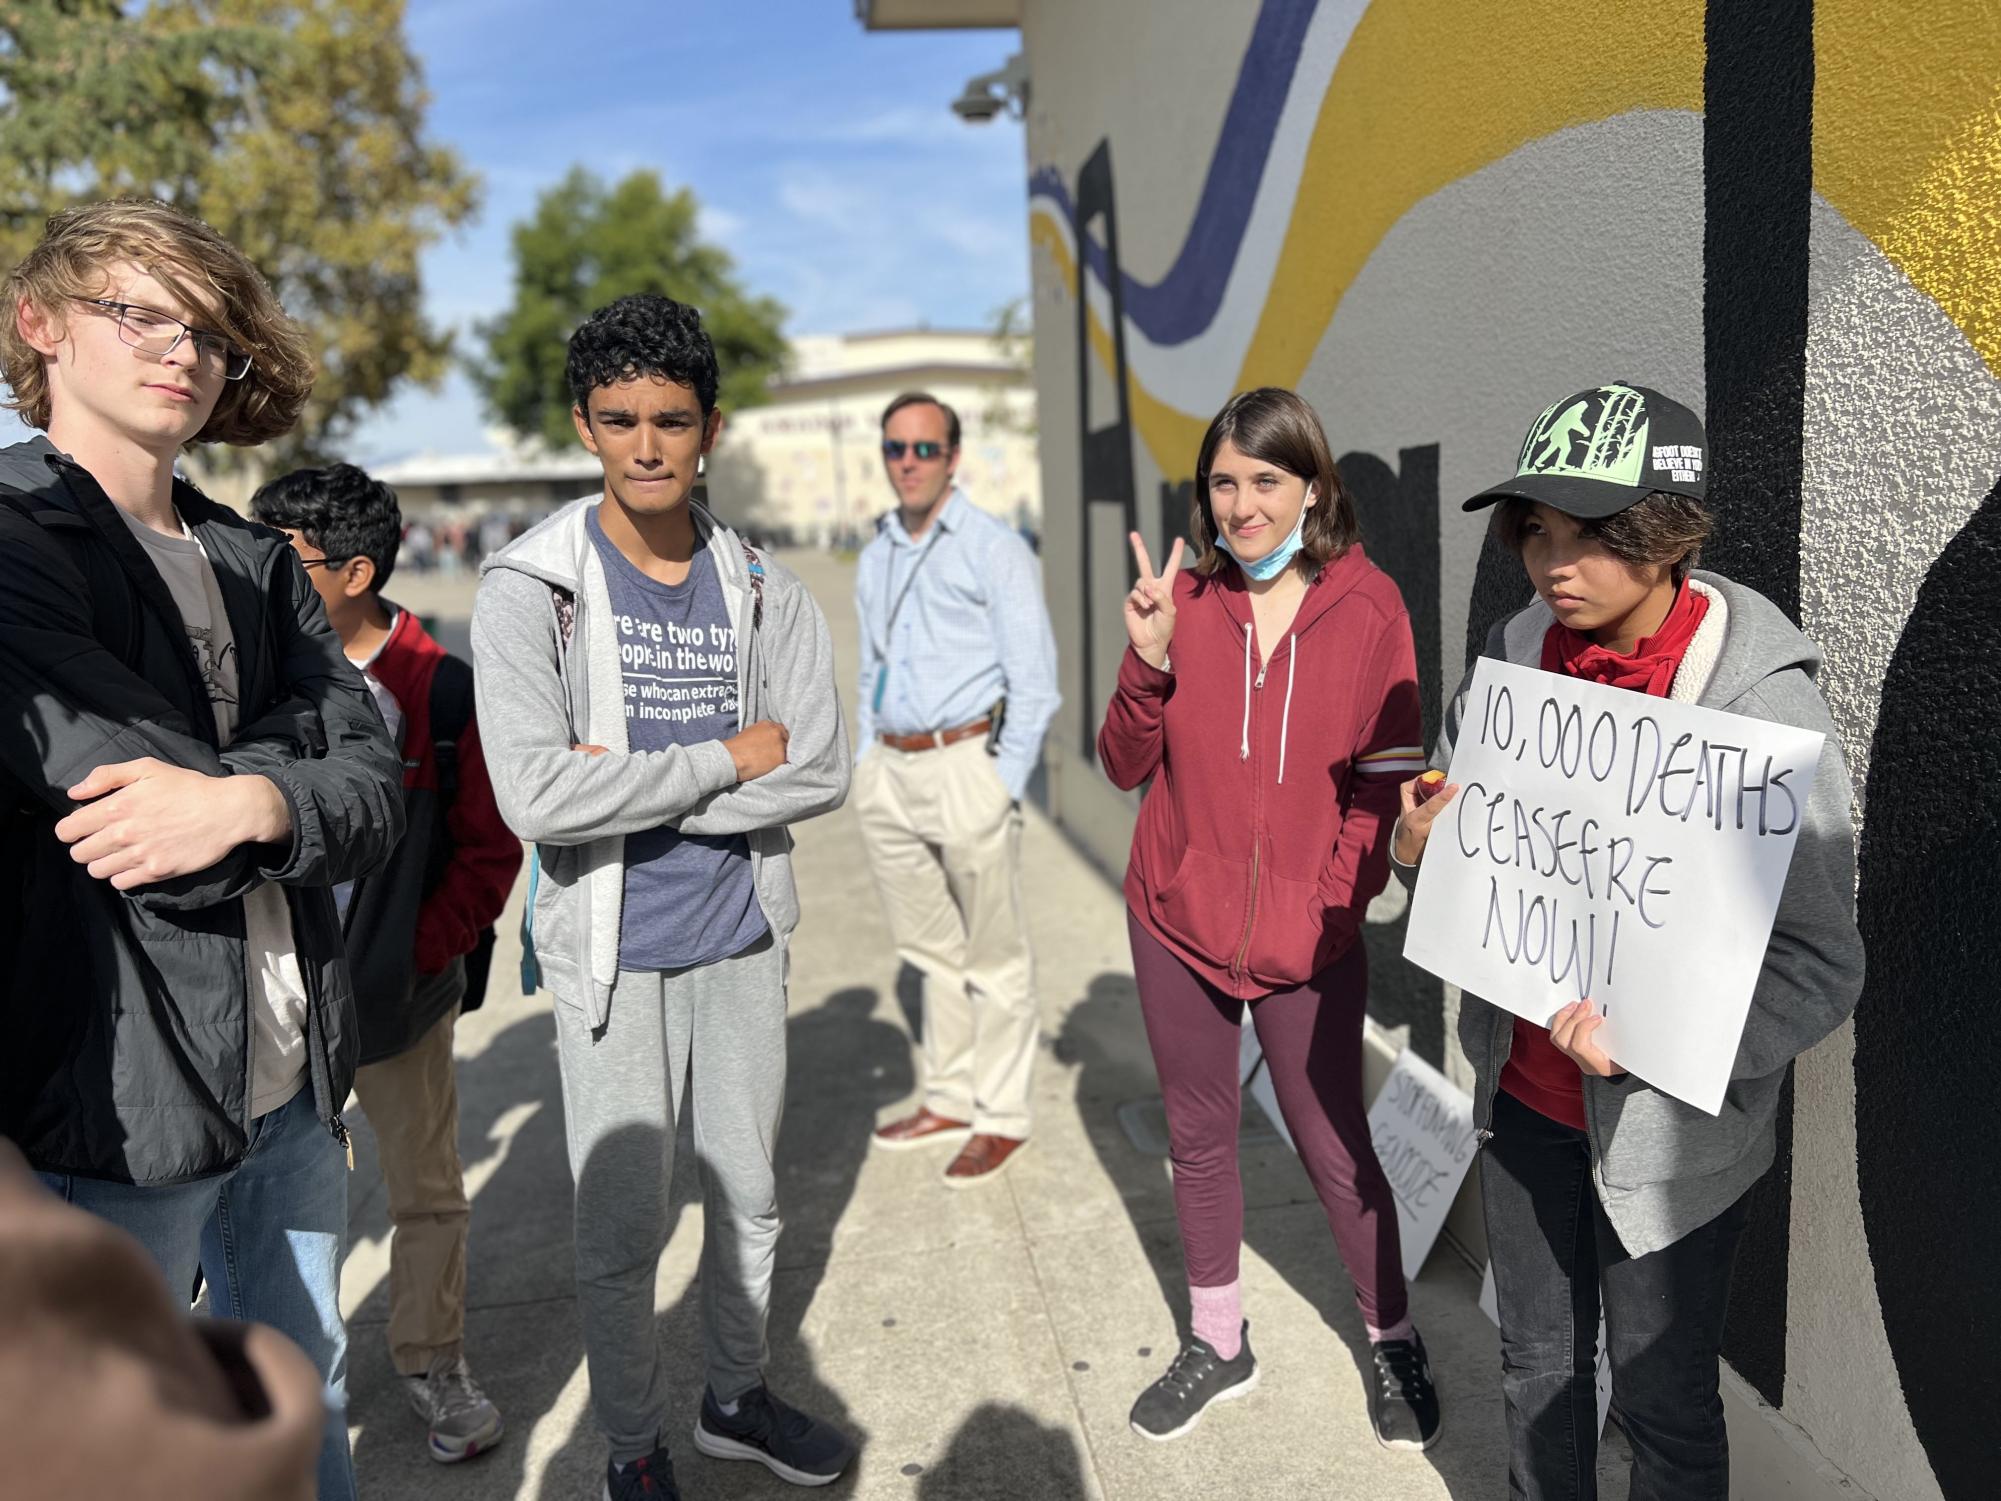 Amador+students+organize+walkout+in+response+to+events+in+Middle+East